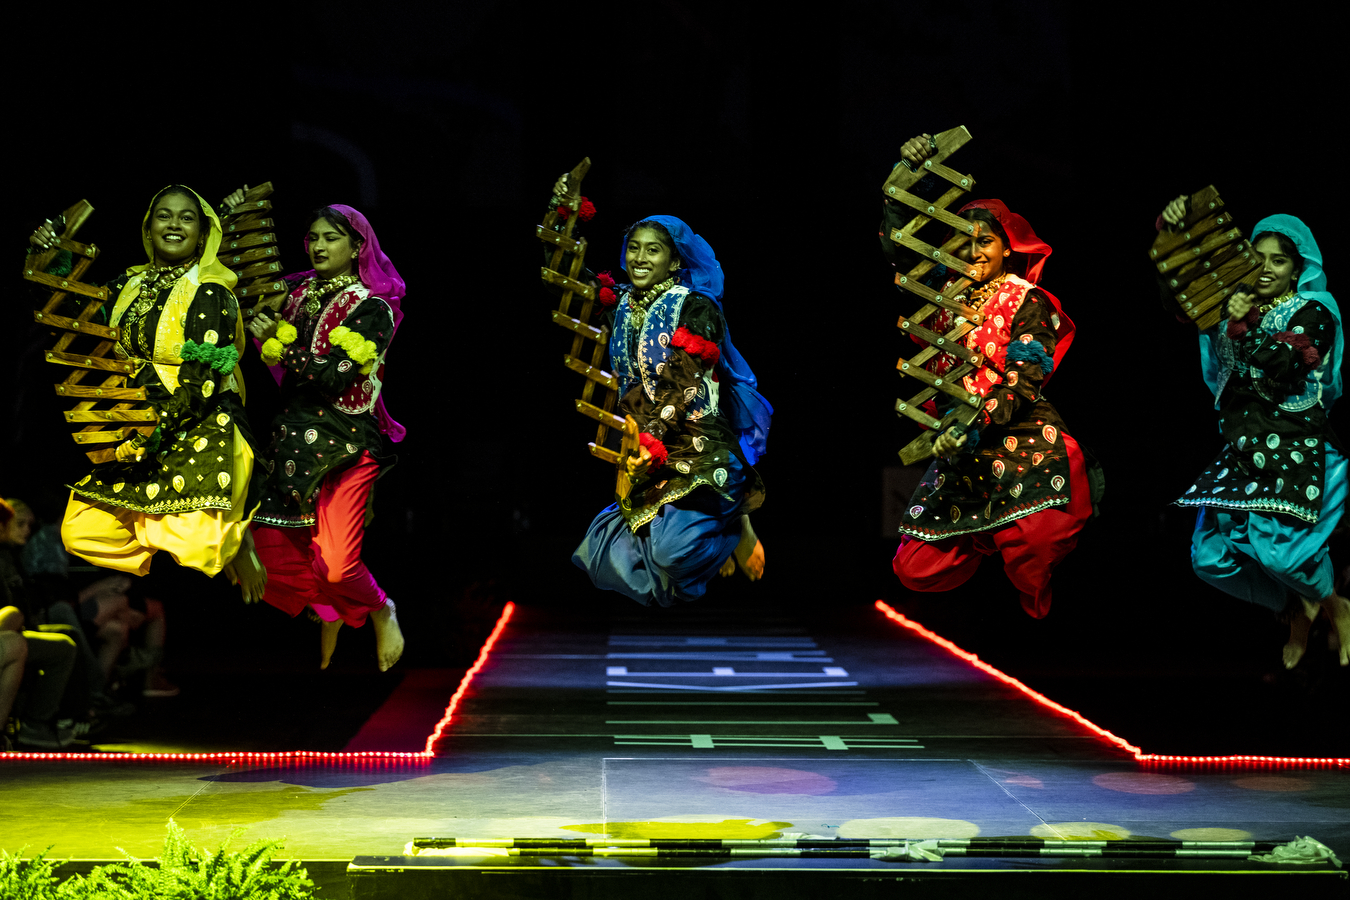 Five people wearing multi-colored outfits are dancing together on a stage while holding large pieces of wooden instruments. 